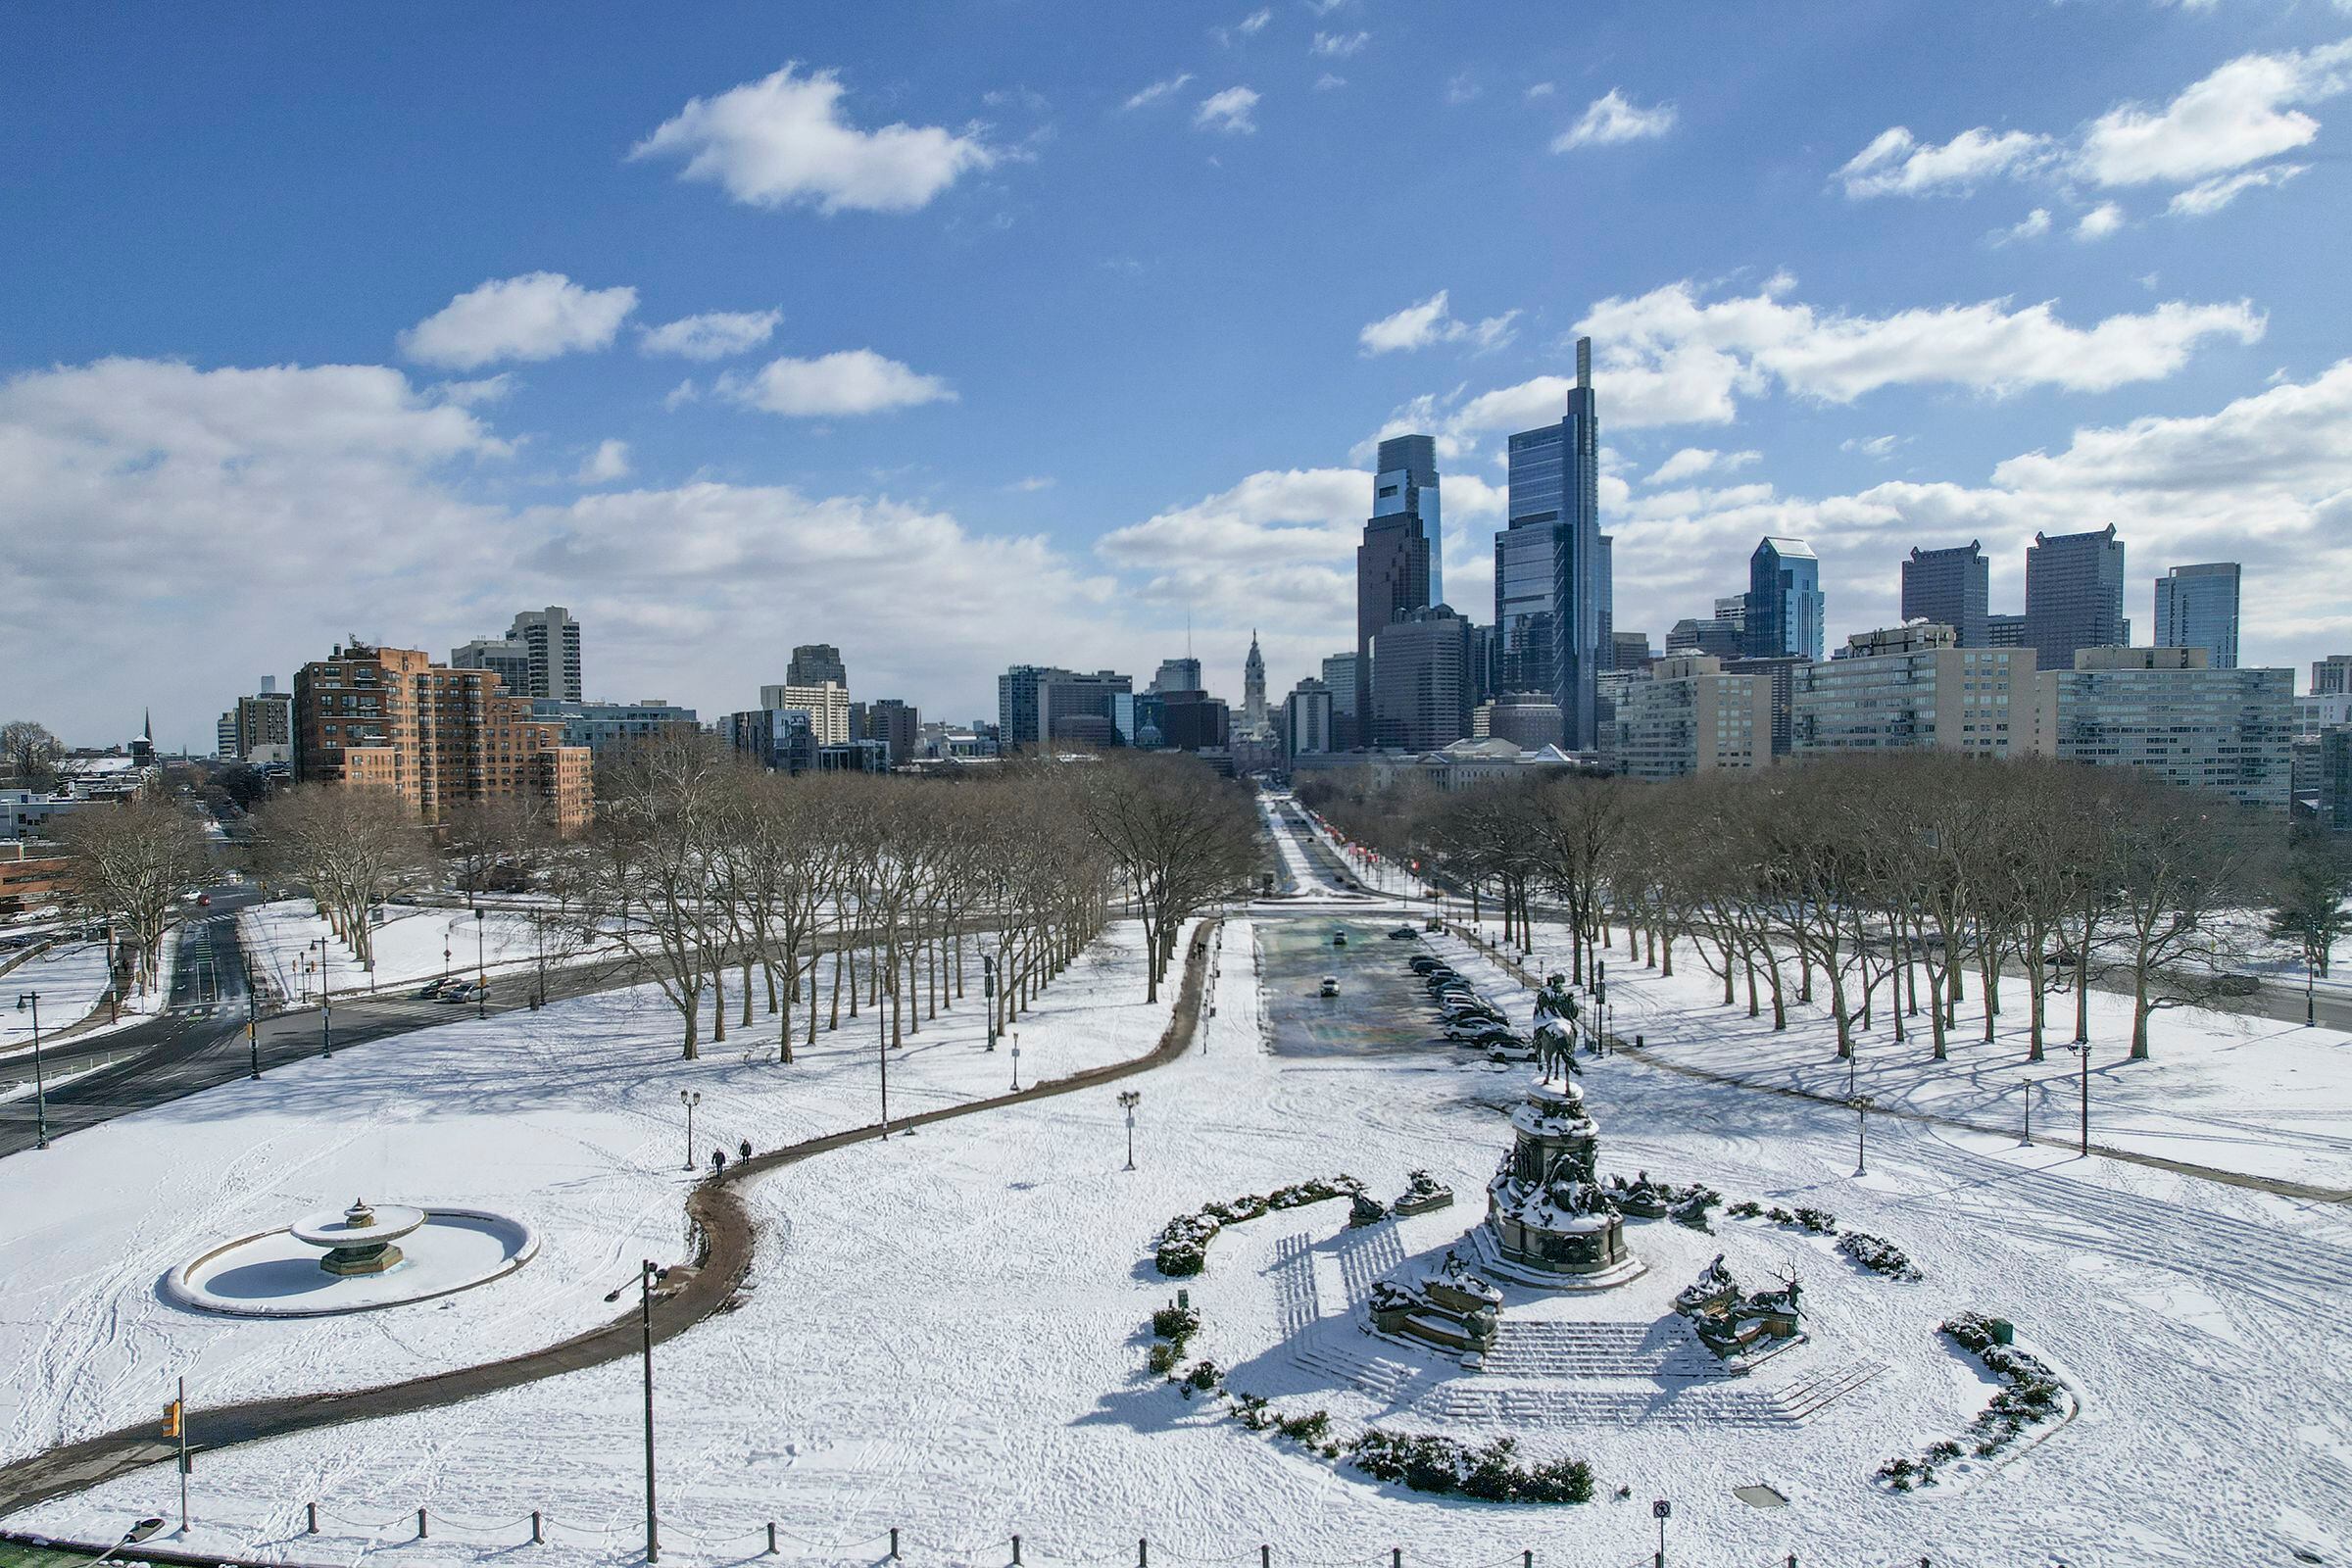 cold, snowy spell of winter is getting a surprisingly warm welcome in philly